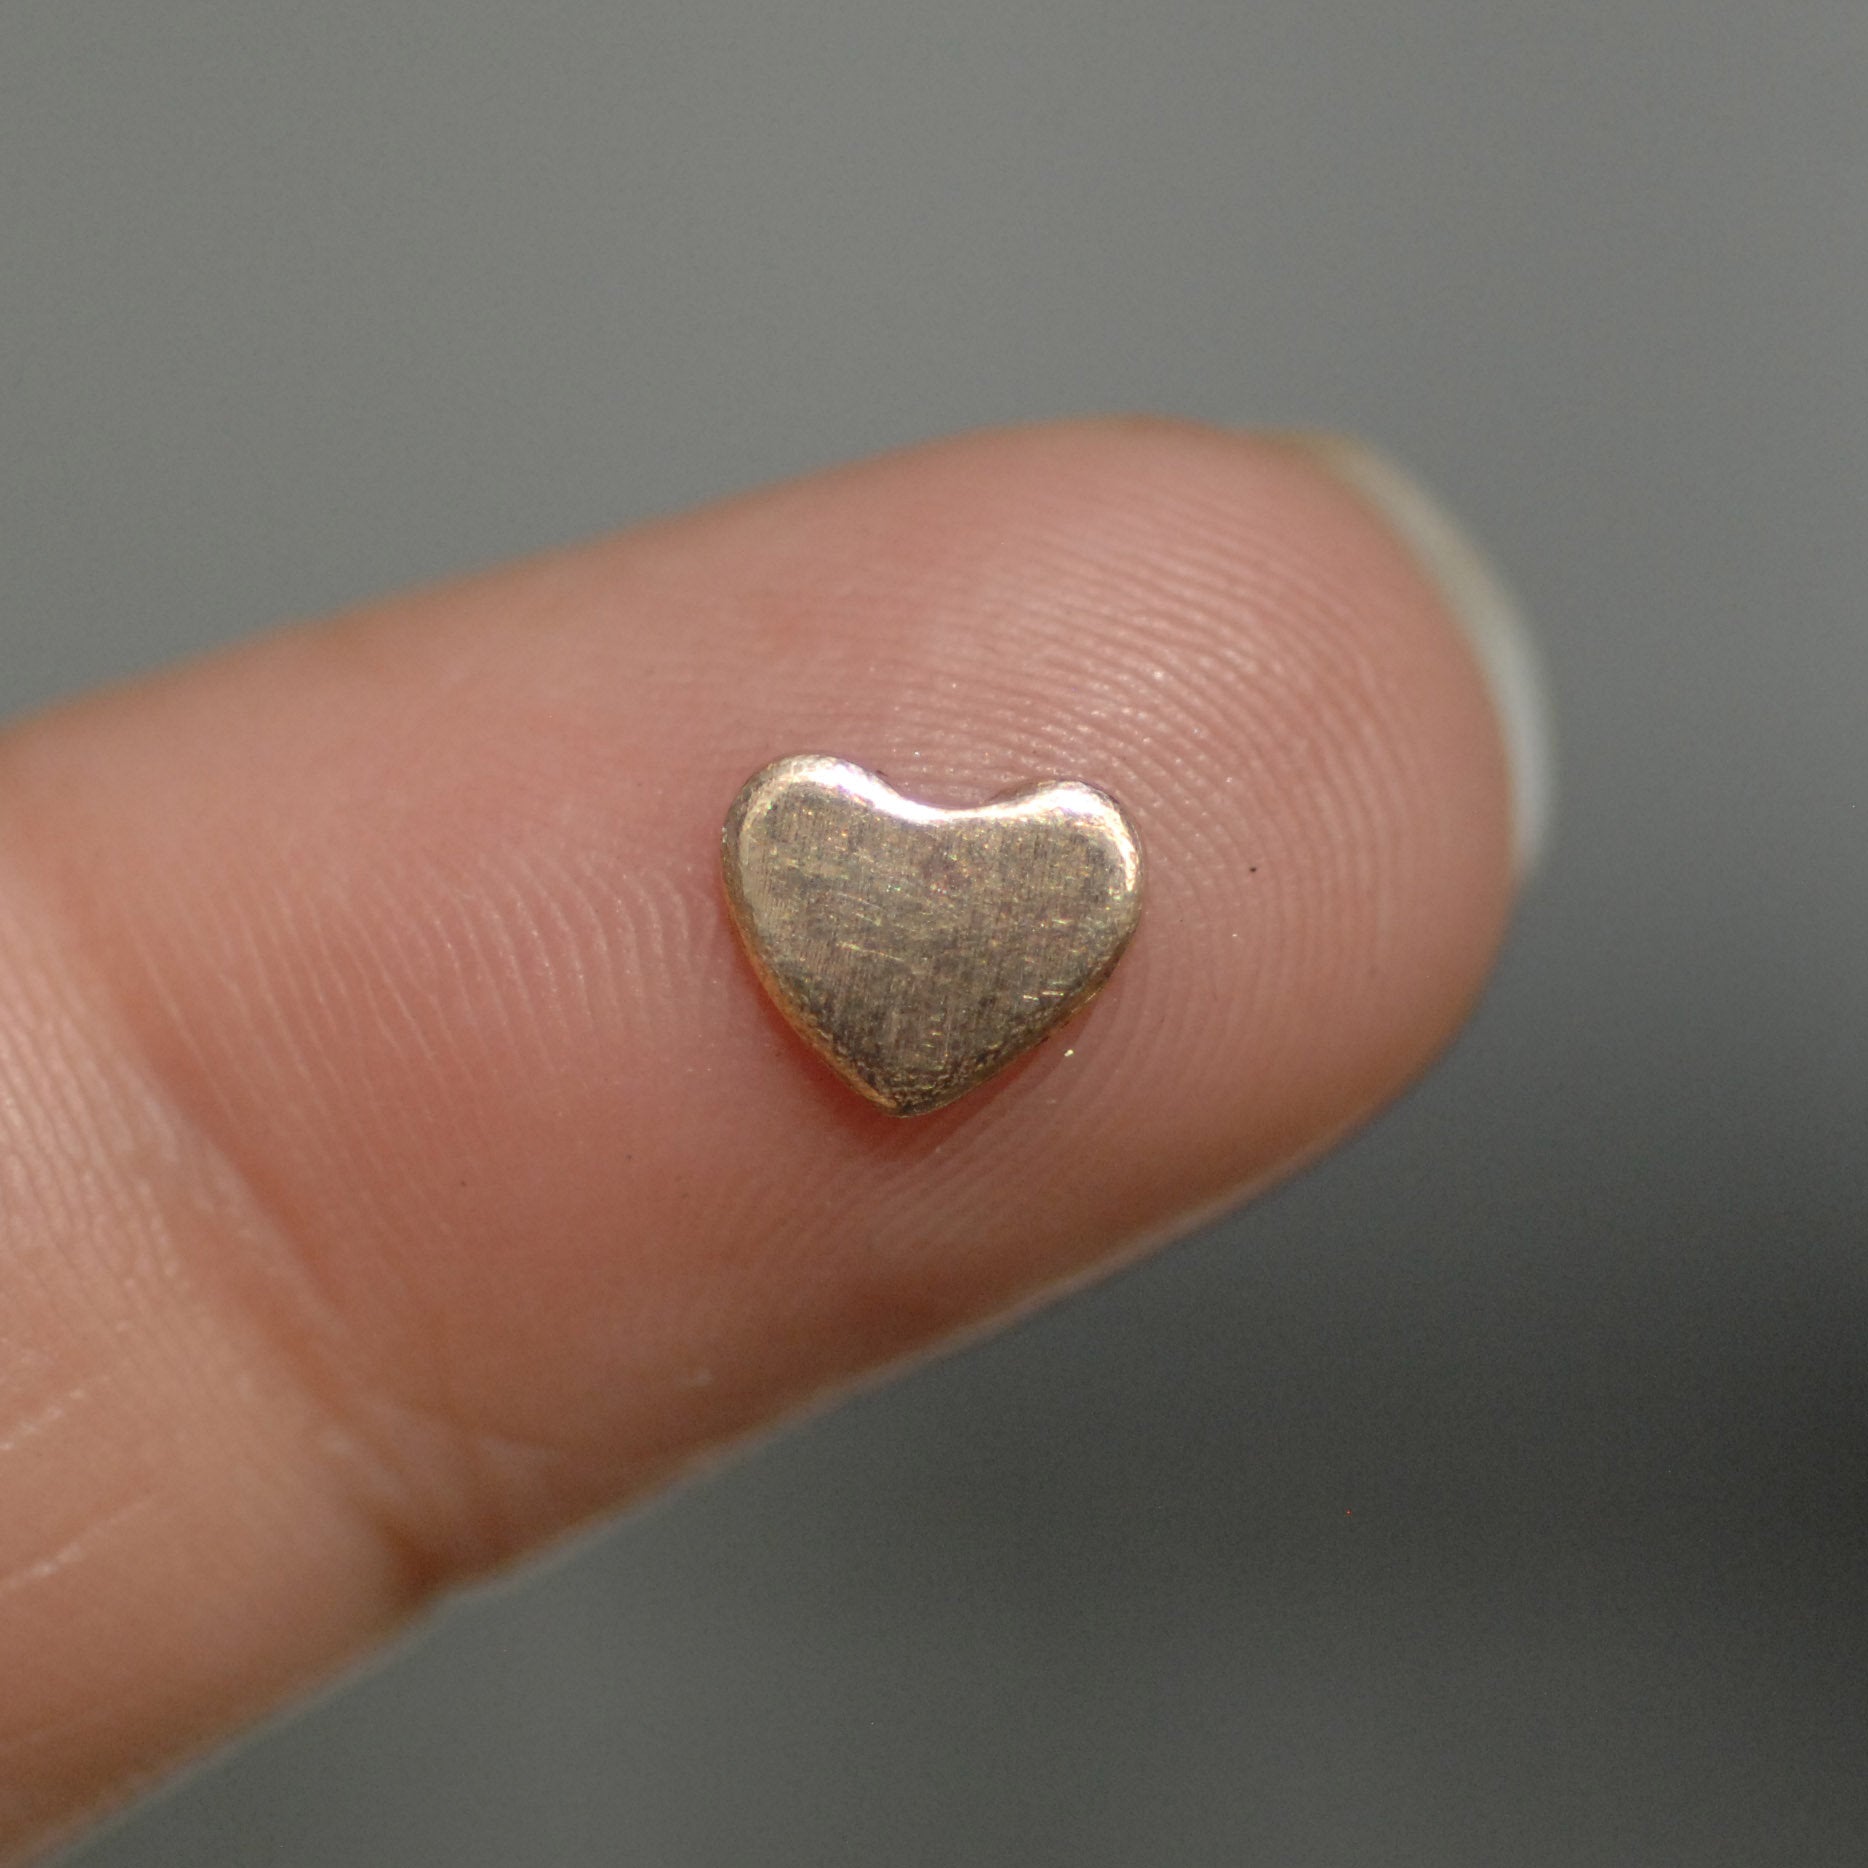 Tiny heart shapes copper, brass, bronze, nickel silver for making jewelry 24g 22g 20g